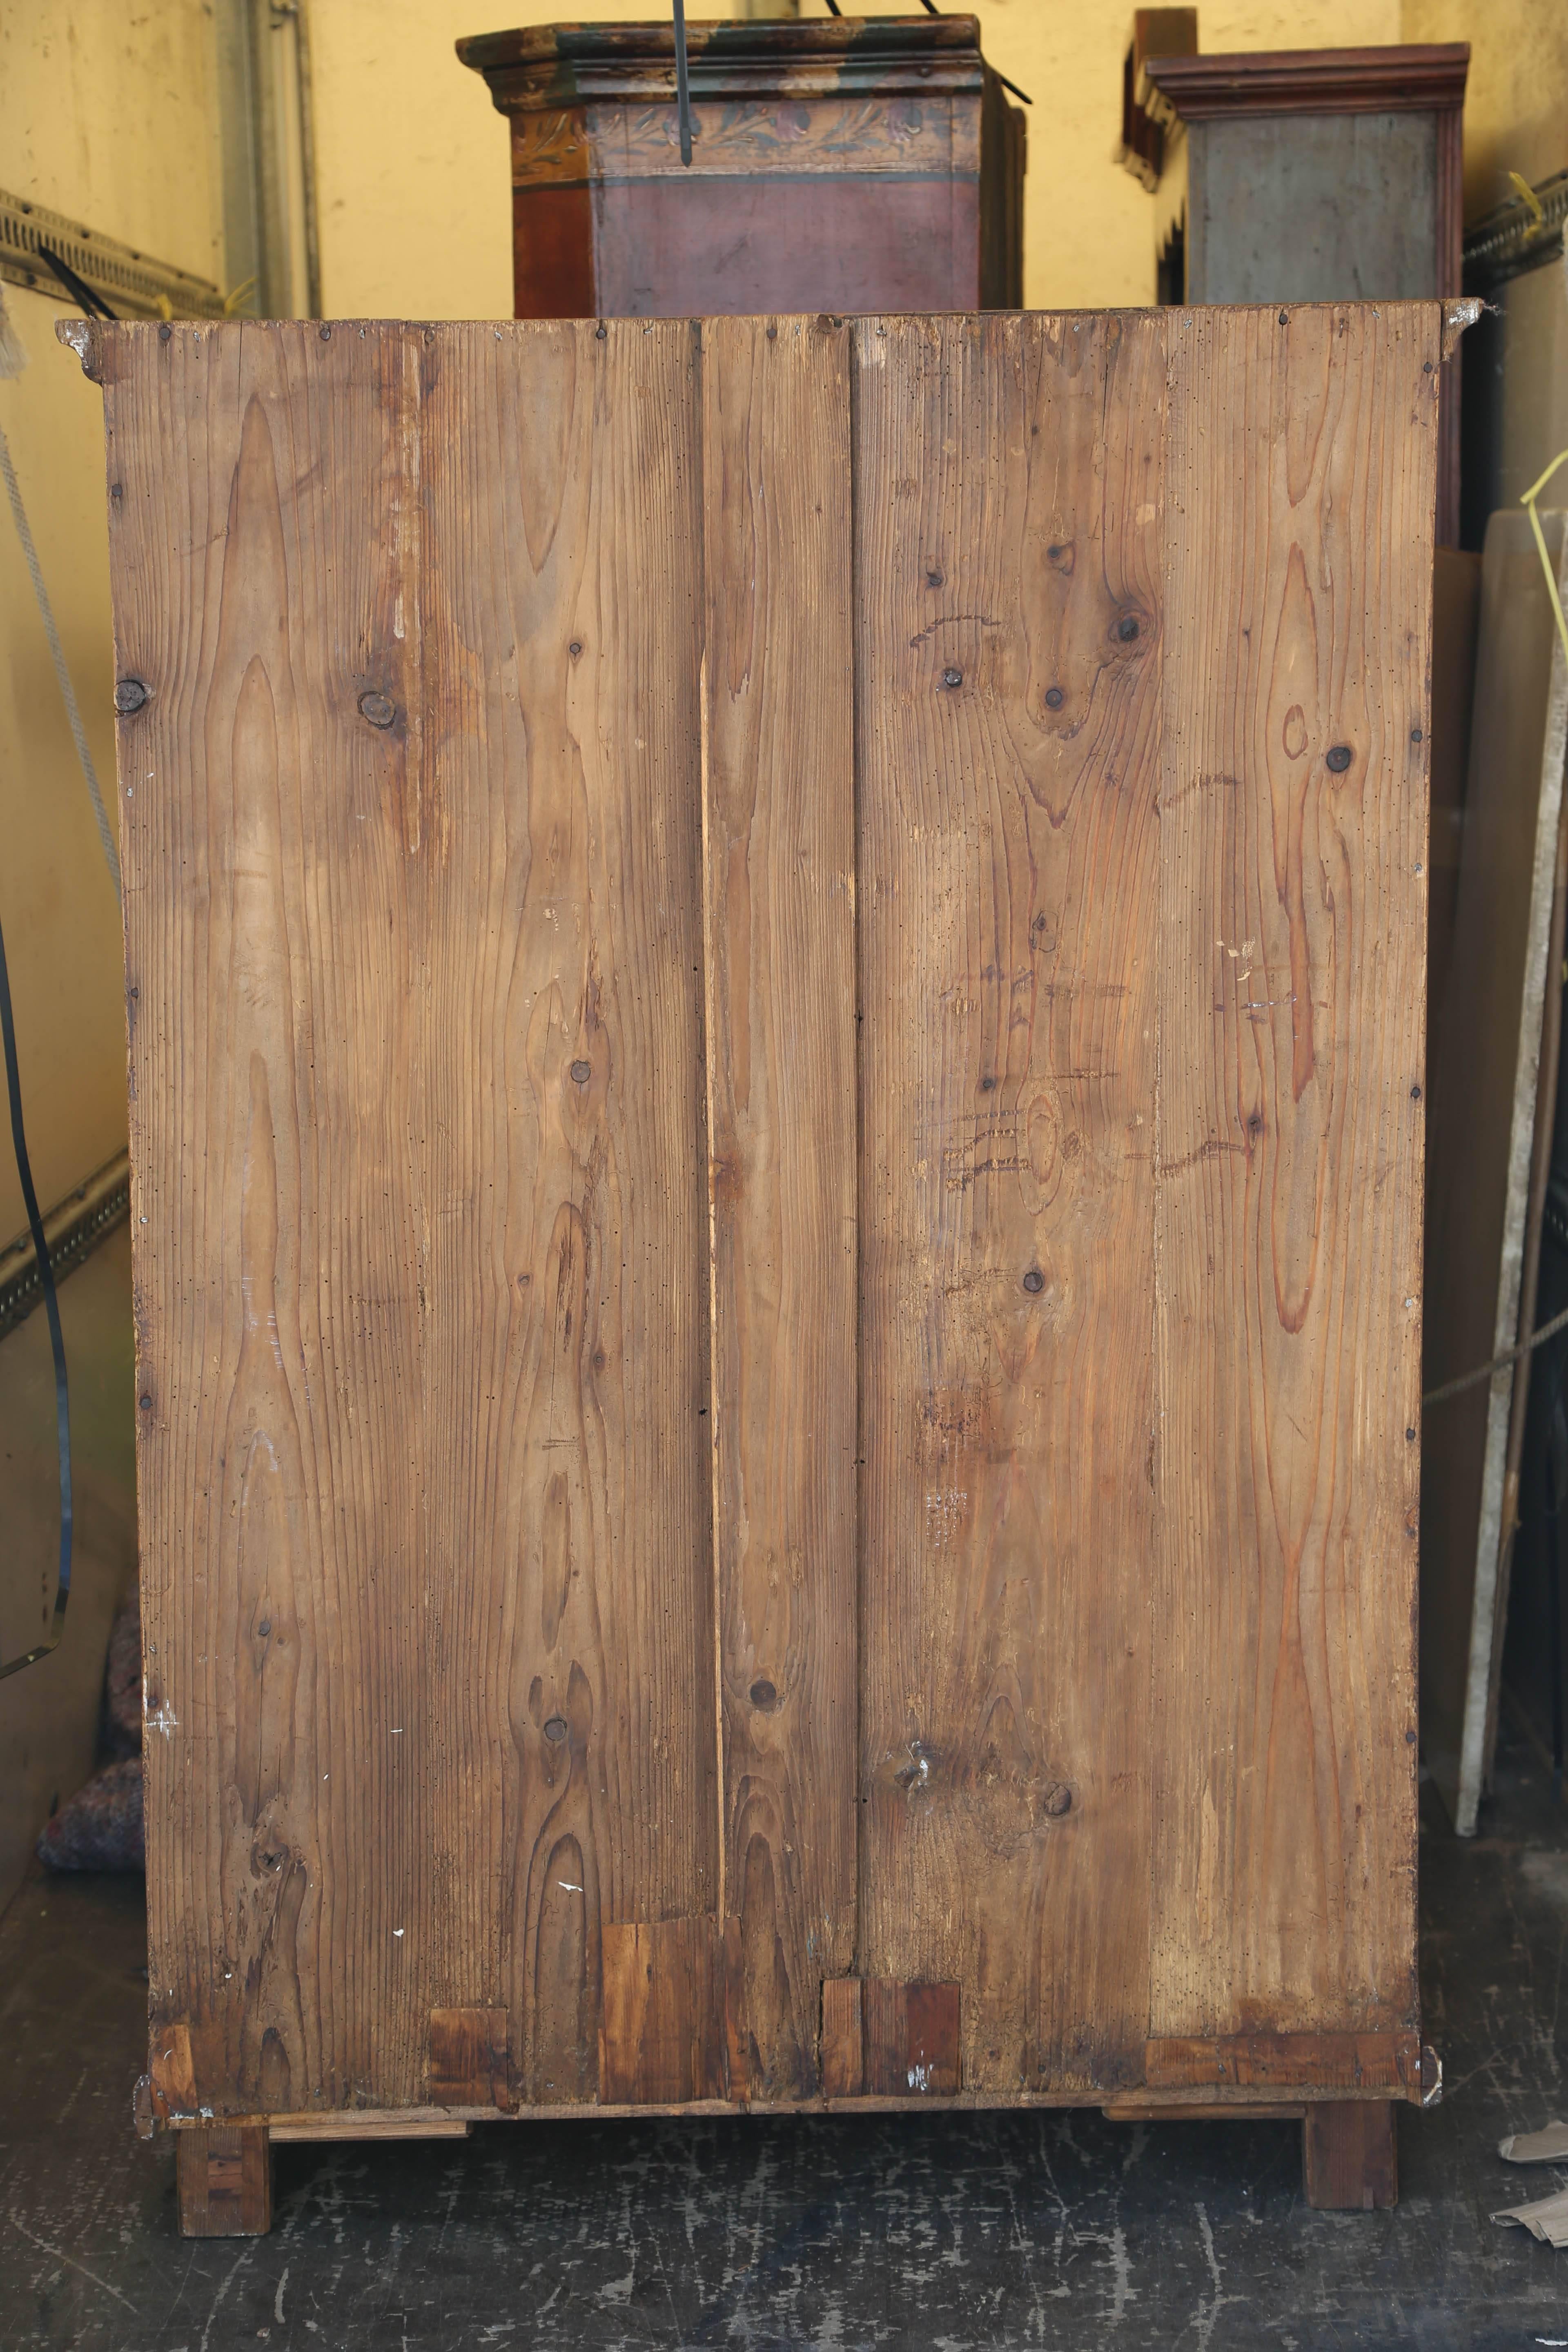 This is a original antique hand-painted armoire which has drawer to one hanging to the other.
The paintwork is original and dates back to the early 1800s.
Measurements are 40 wide, 17 deep, 56 high.
Great for any room in a home.